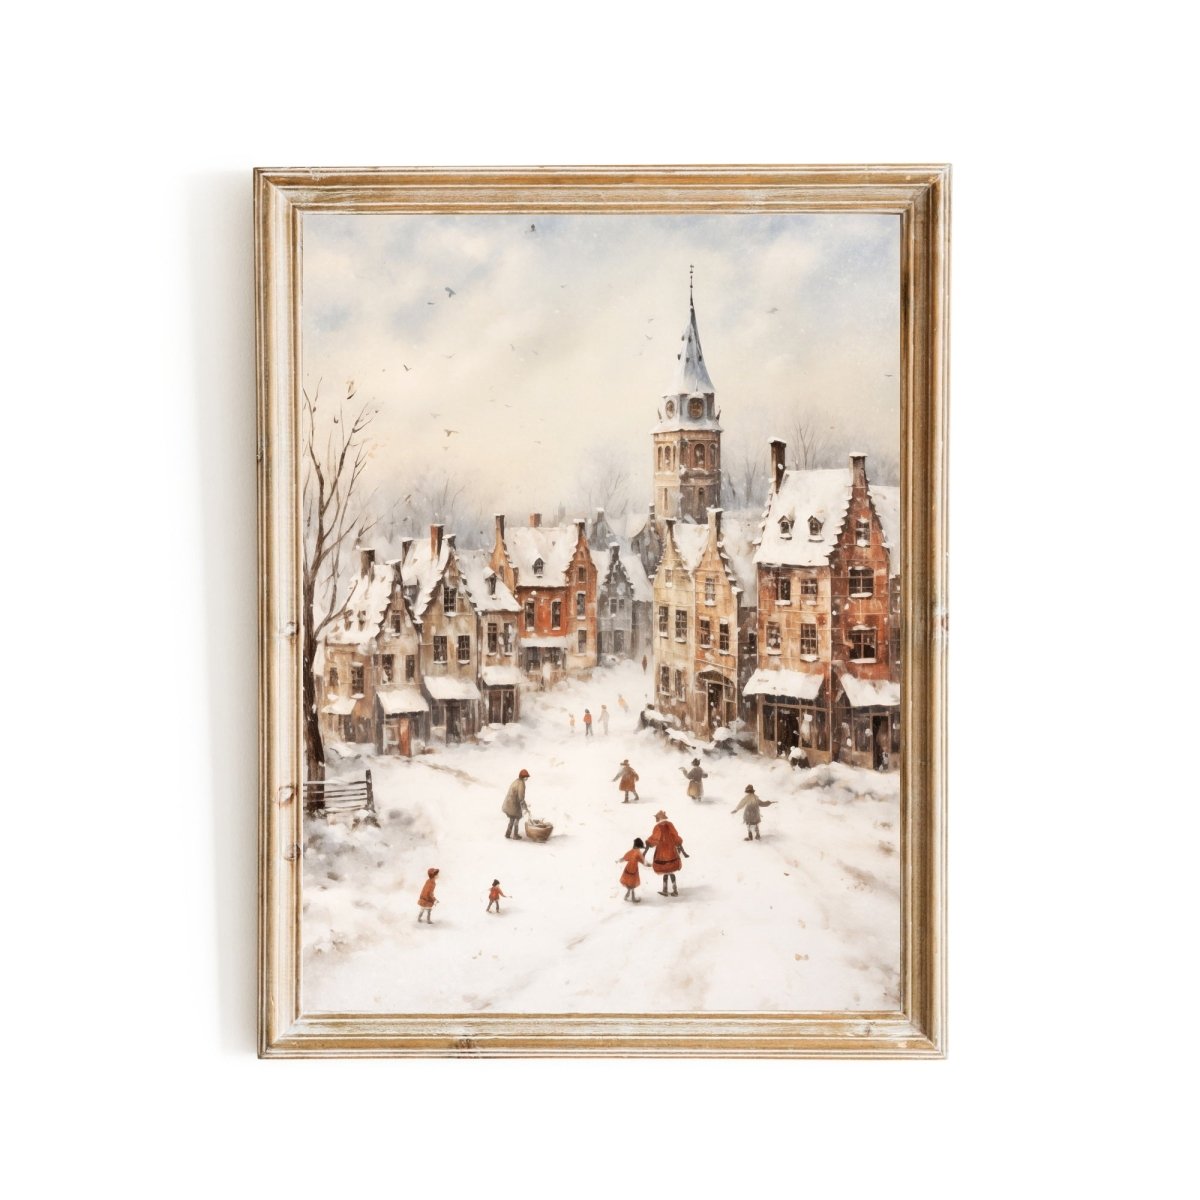 Winter Village Wall Art Vintage Winter Landscape Snowy Town Christmas Village Scene Classice Seasonal Print Antique Painting Paper Poster Print - Everything Pixel